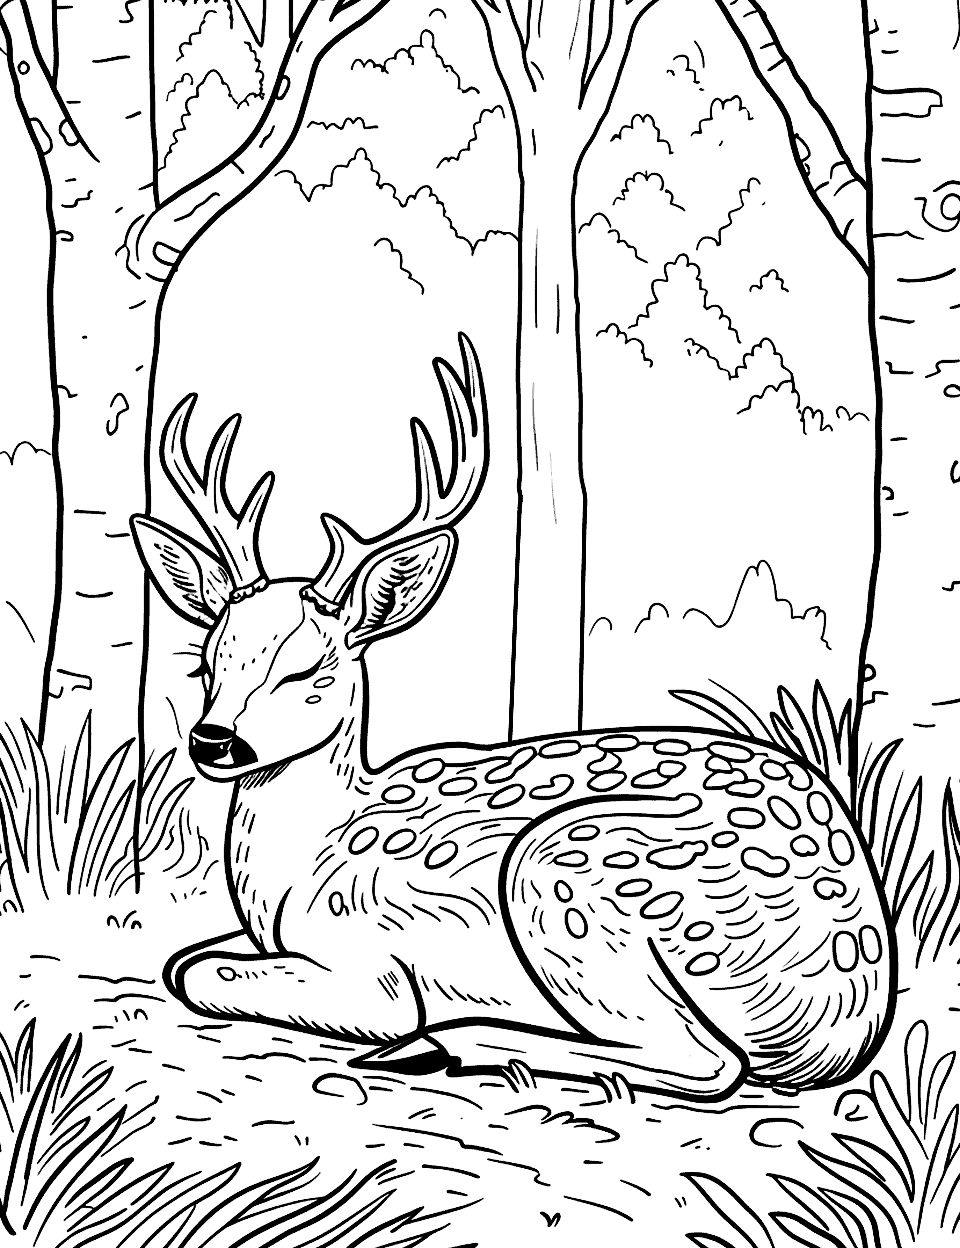 Sleeping Fawn in a Forest Clearing Coloring Page - A peaceful fawn sleeping curled up in a forest clearing.